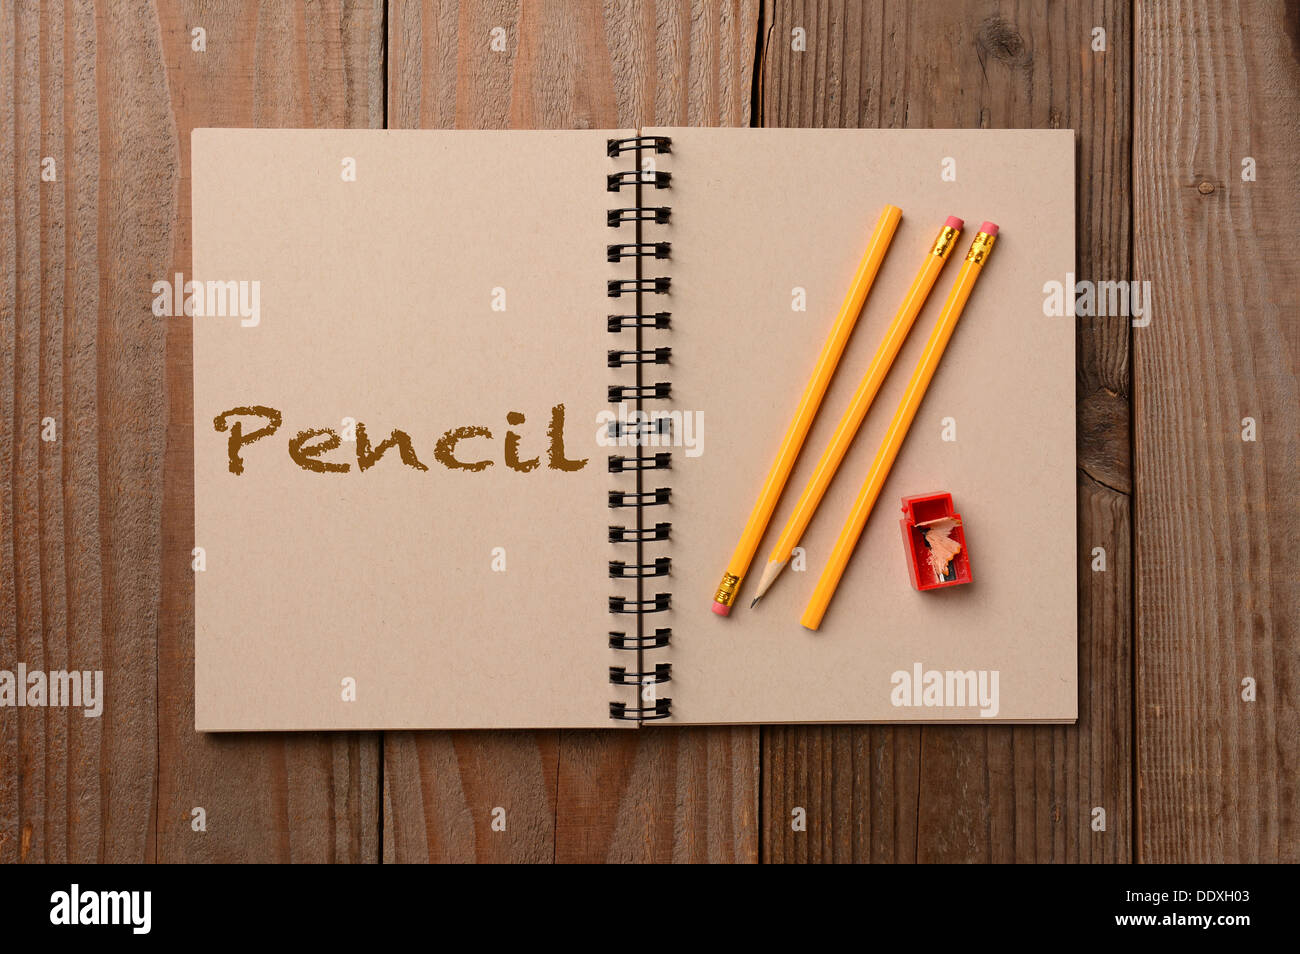 A group of pencils on the blank page of a notebook. The opposite page has the word Pencil spelled out. Stock Photo